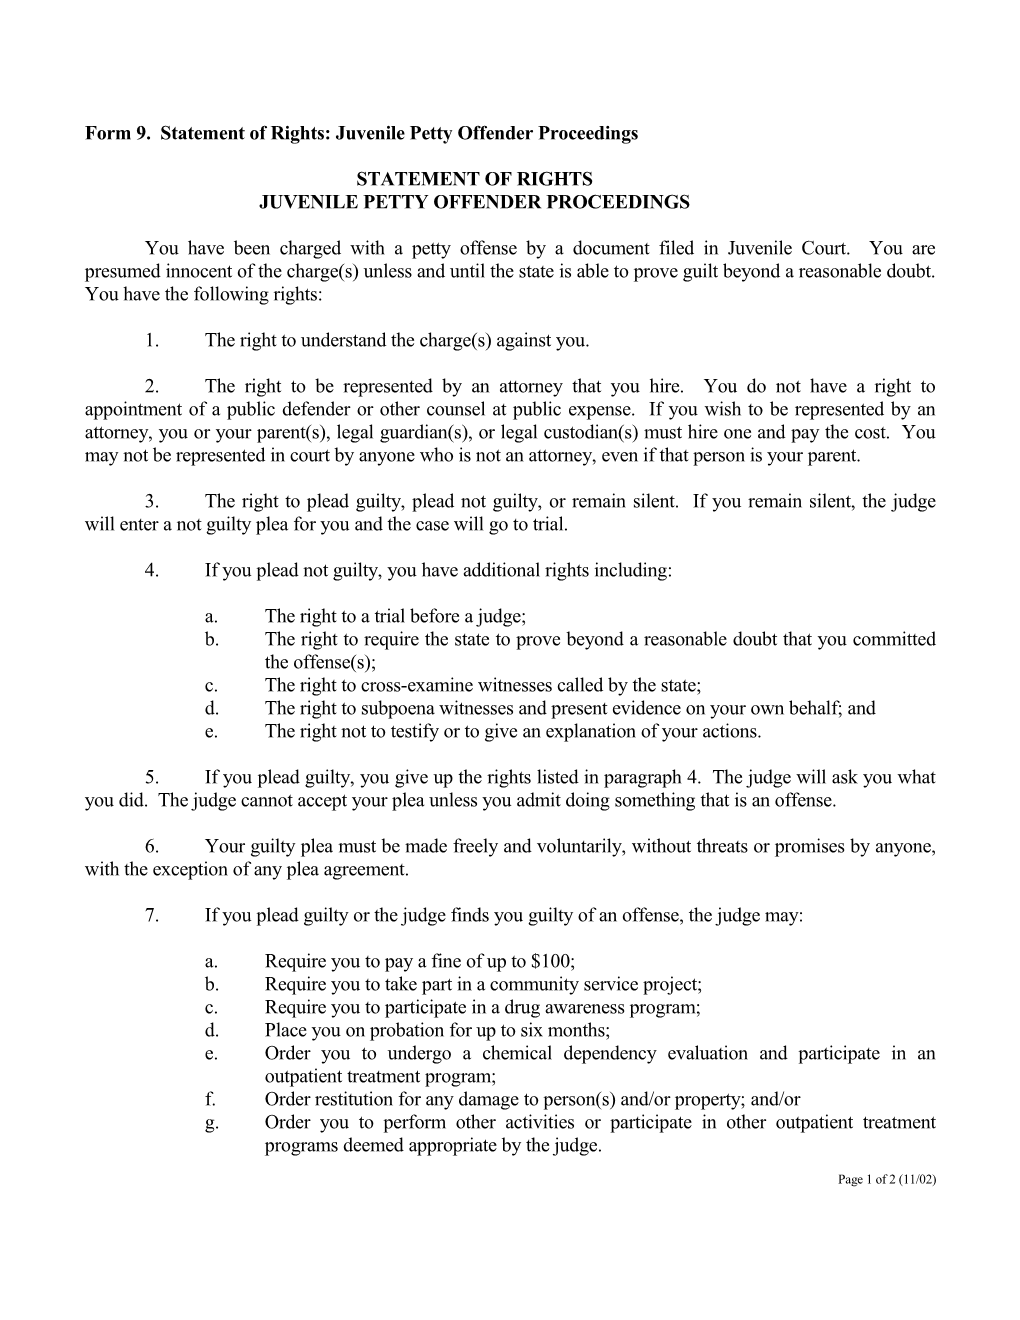 Form 9. Statement of Rights: Juvenile Petty Offender Proceedings